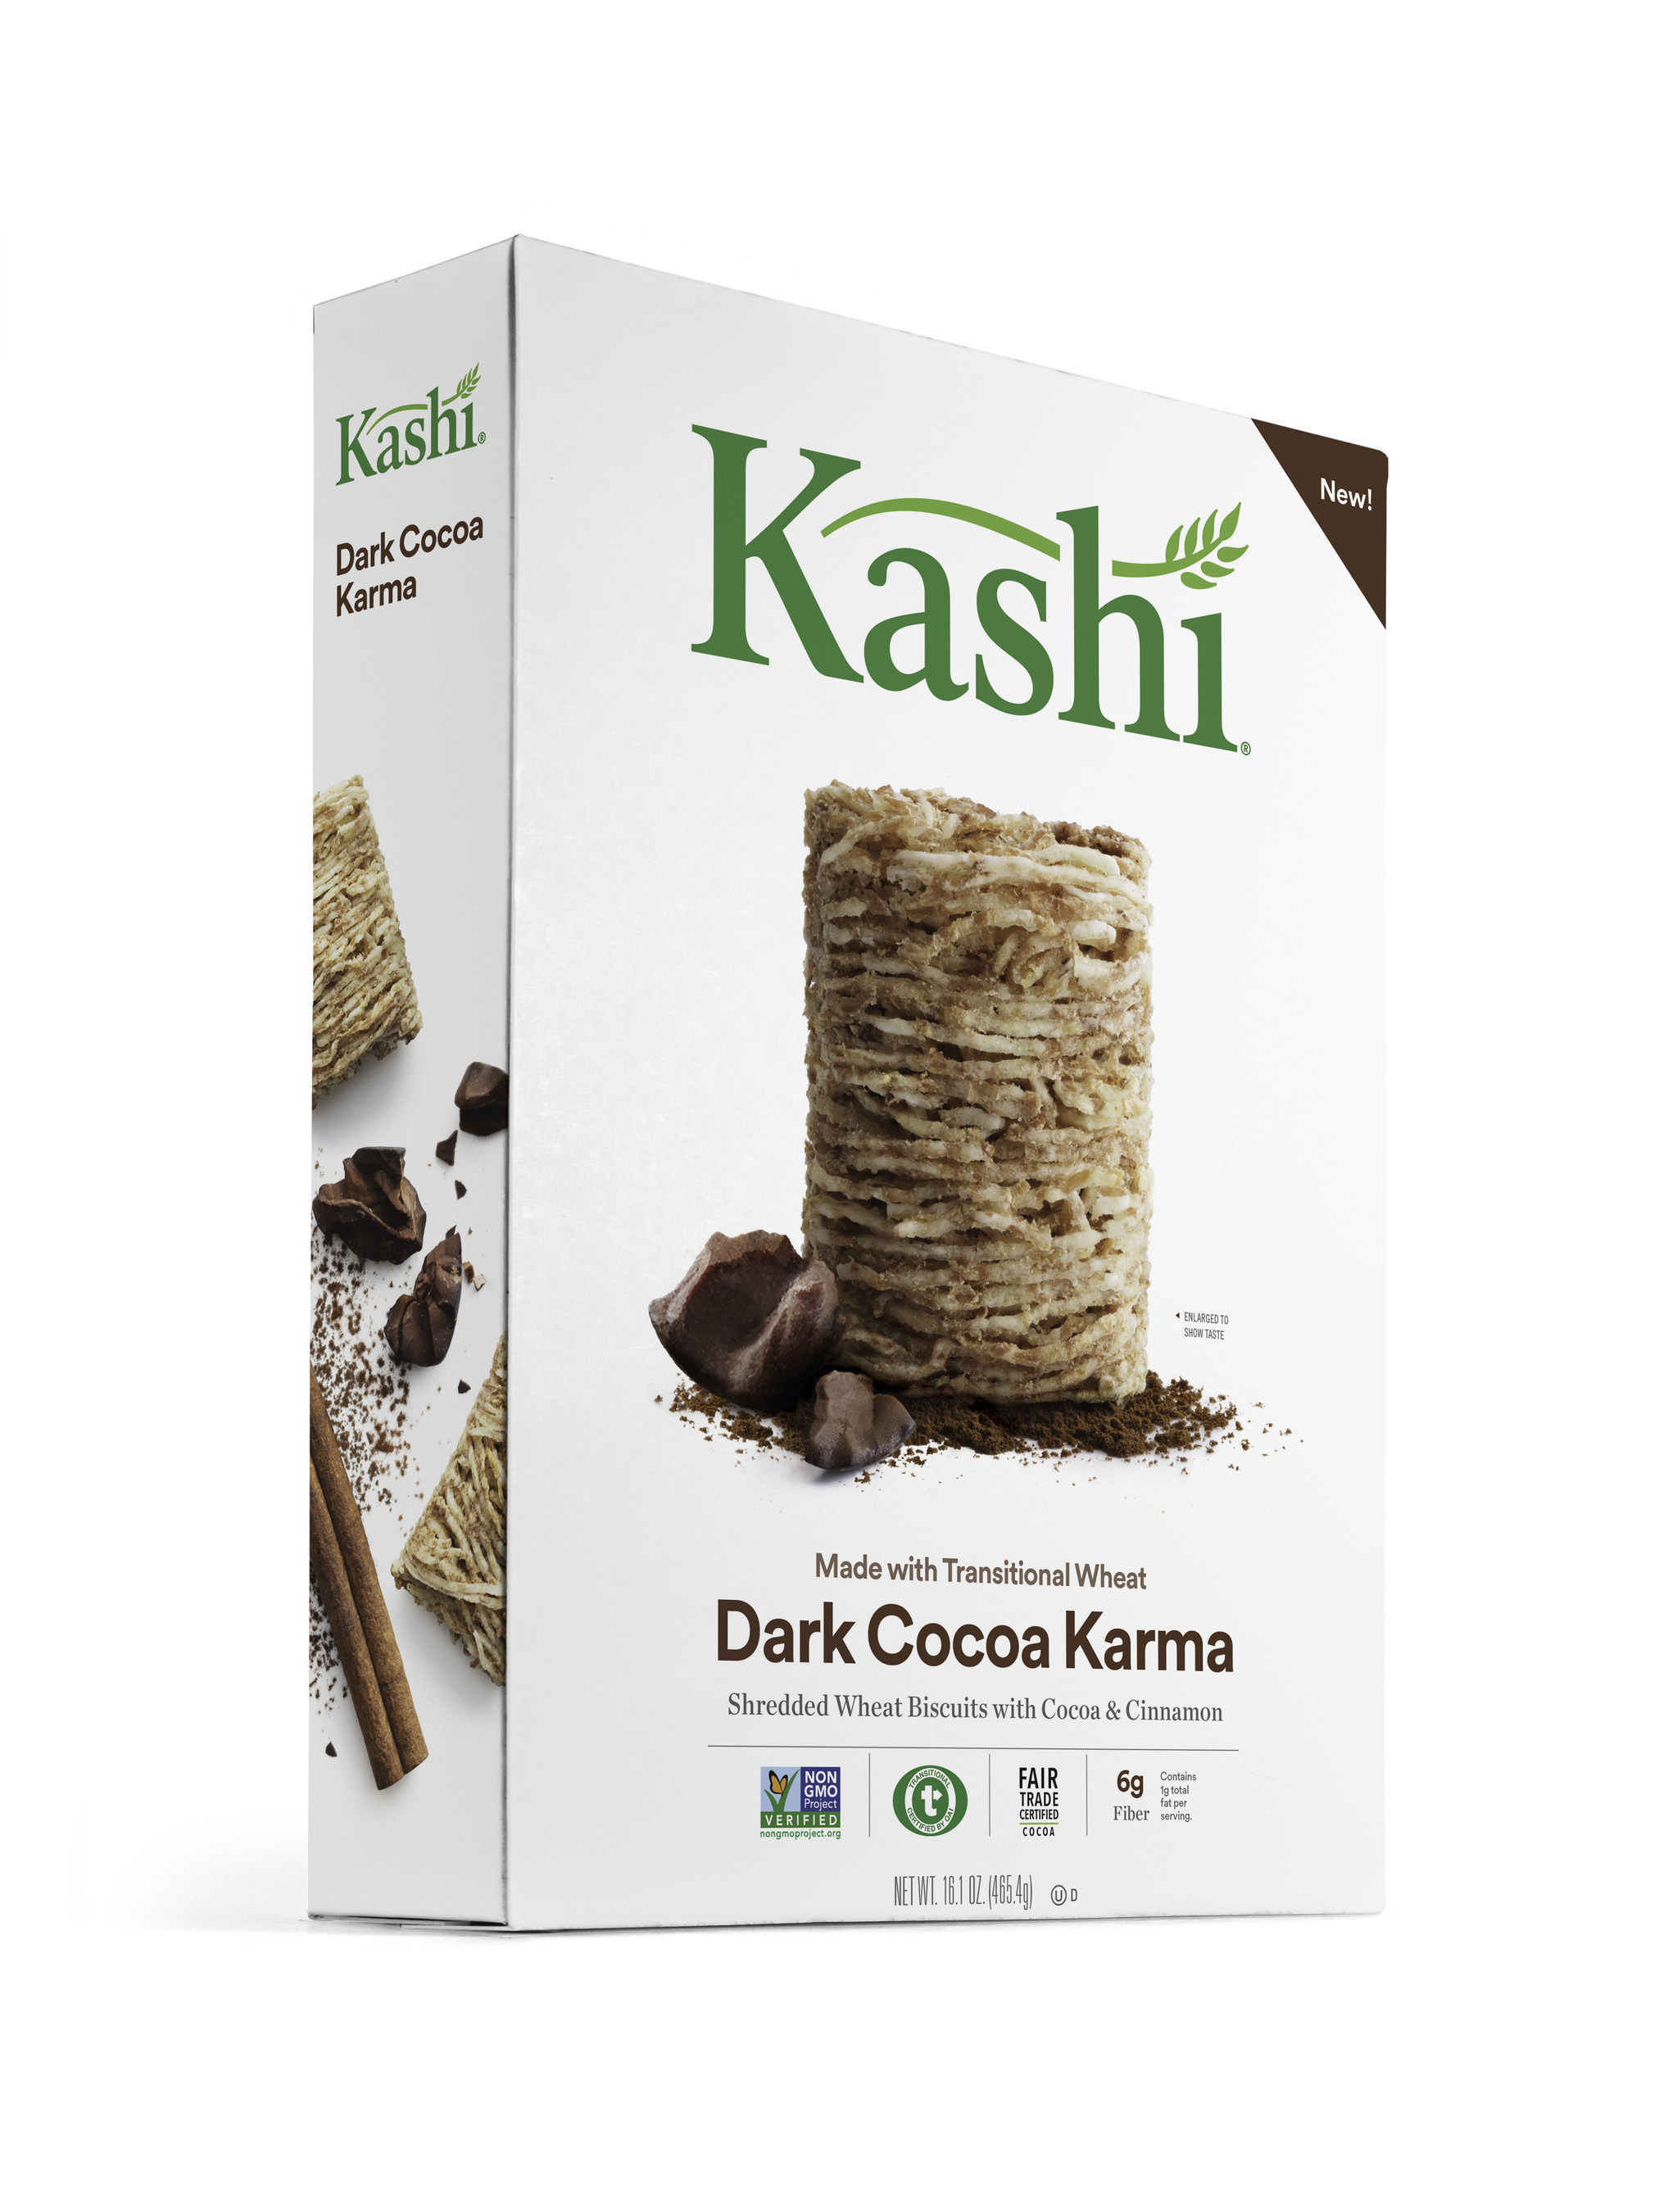 Kashi announces pioneering Certified Transitional protocol and launches first Certified Transitional product